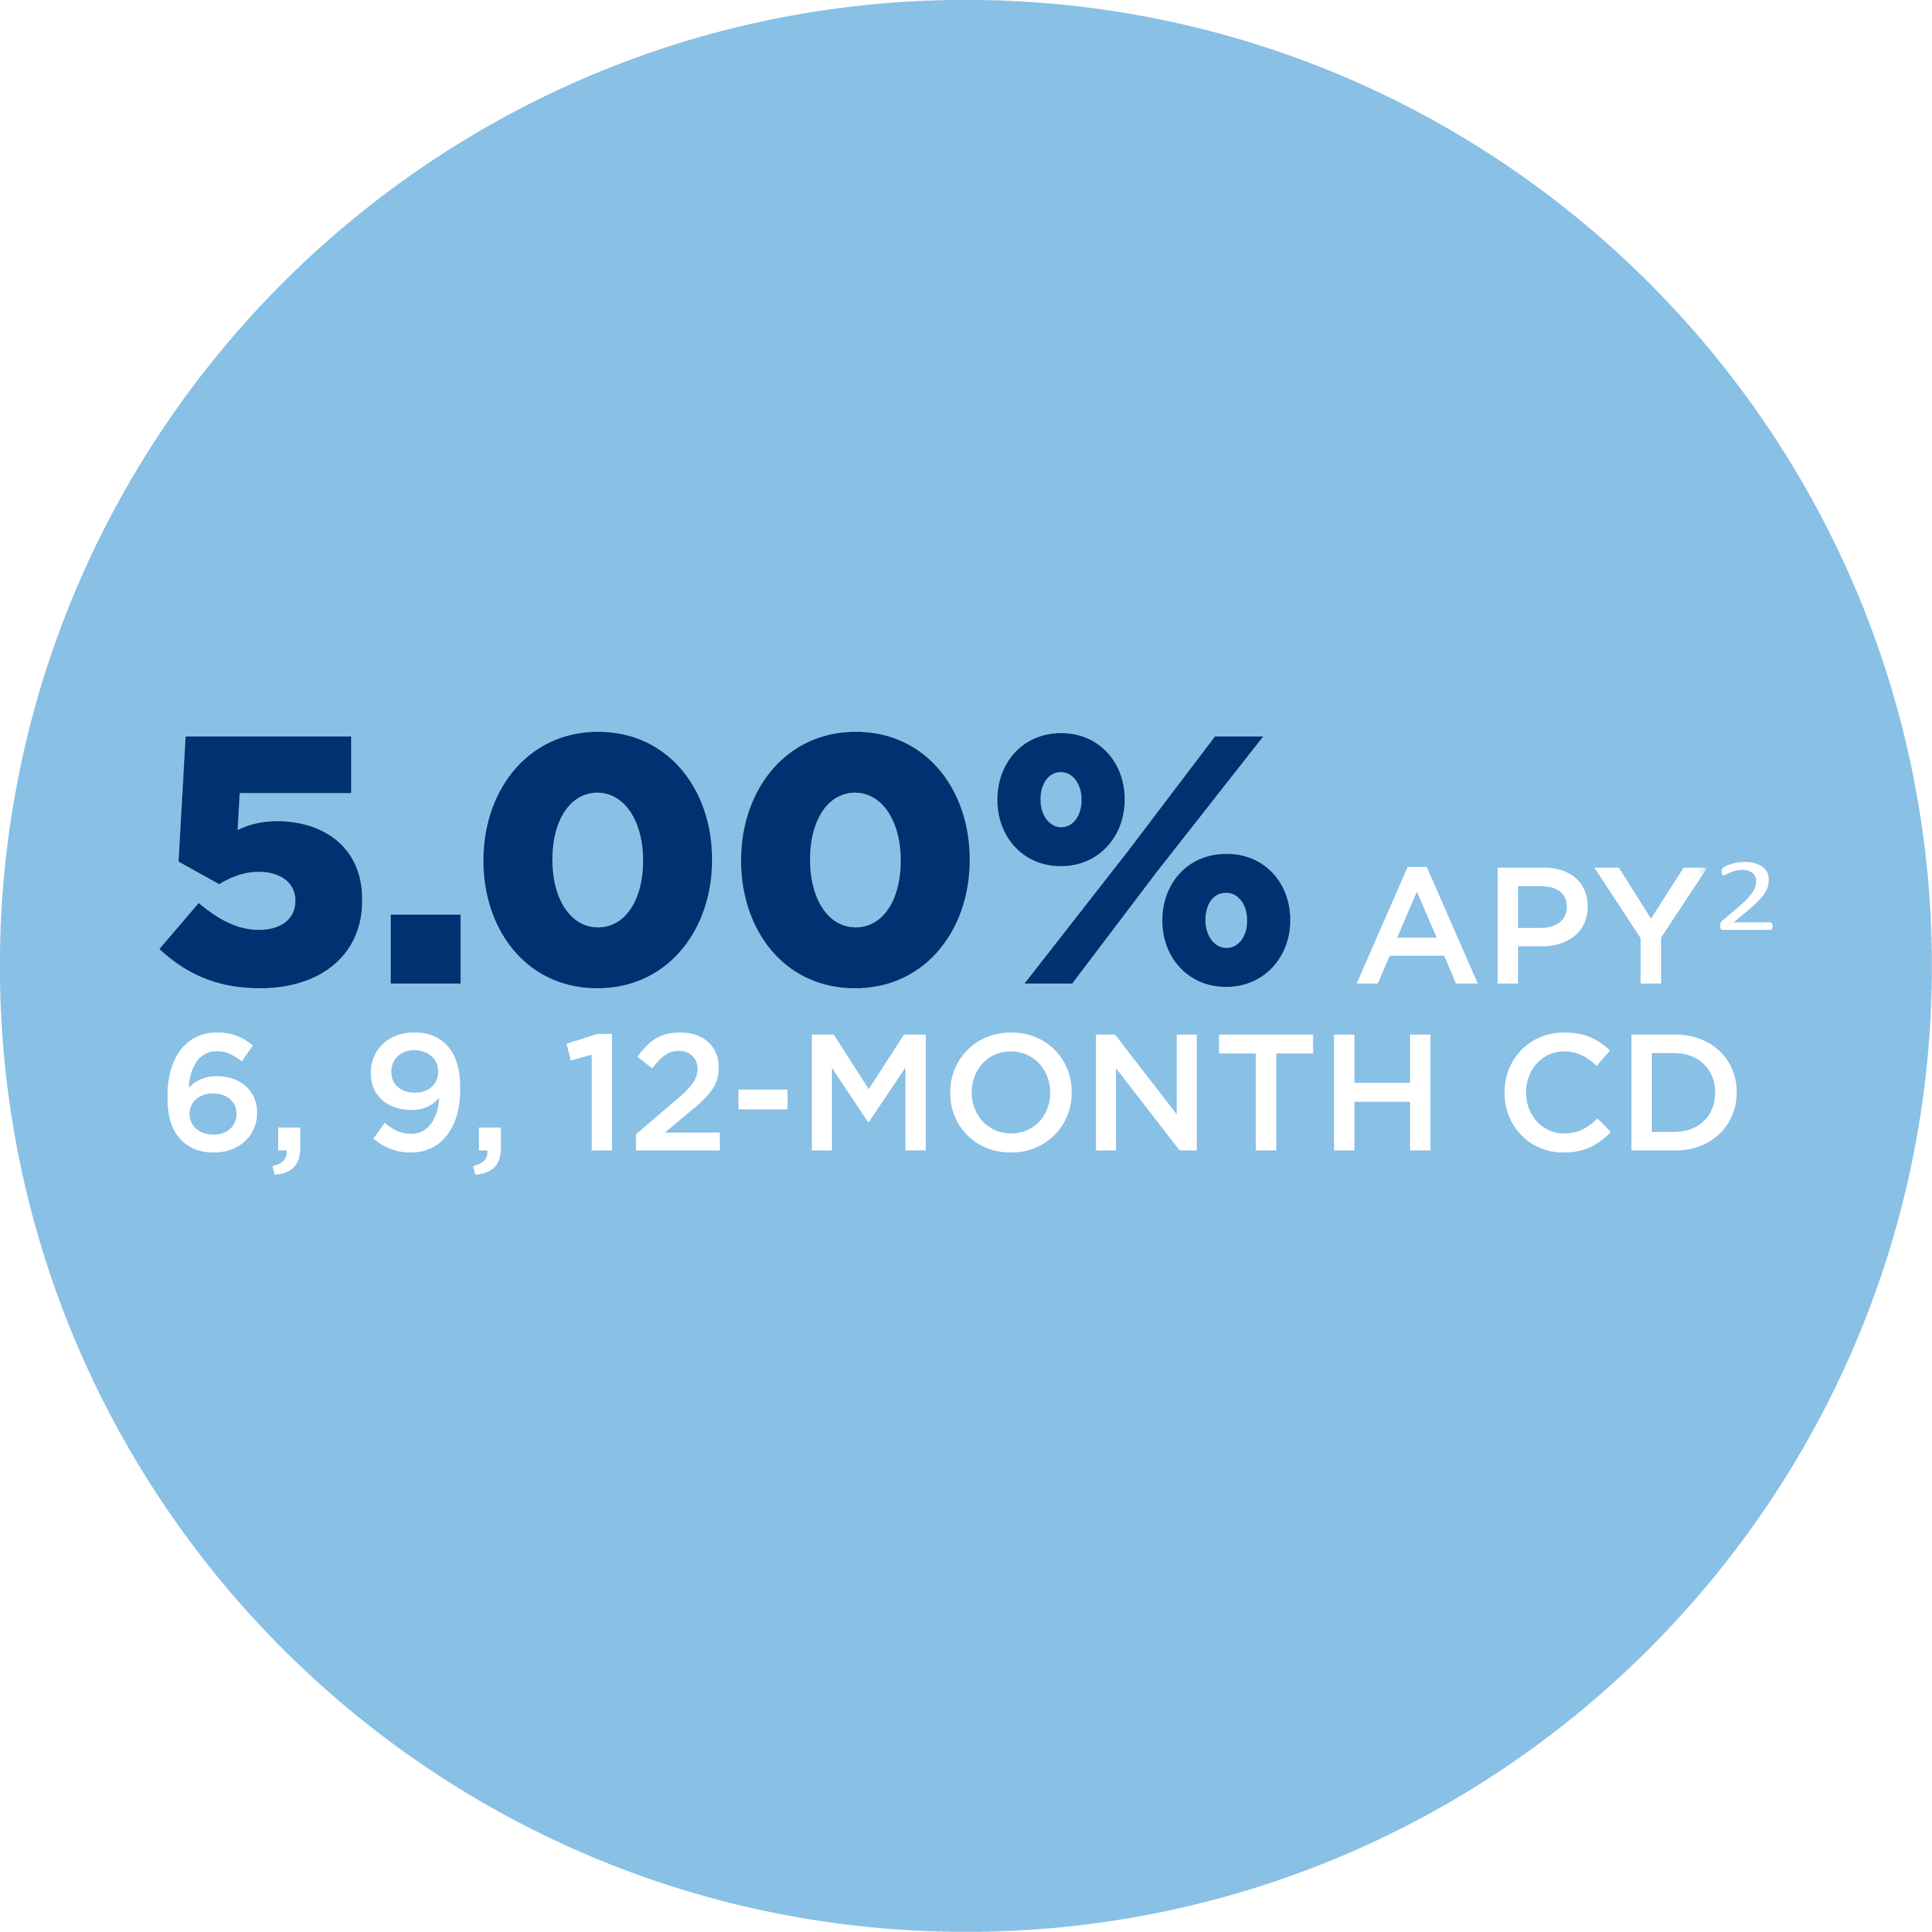 5.00% APY2 for the 6, 9, and 12-month special cd